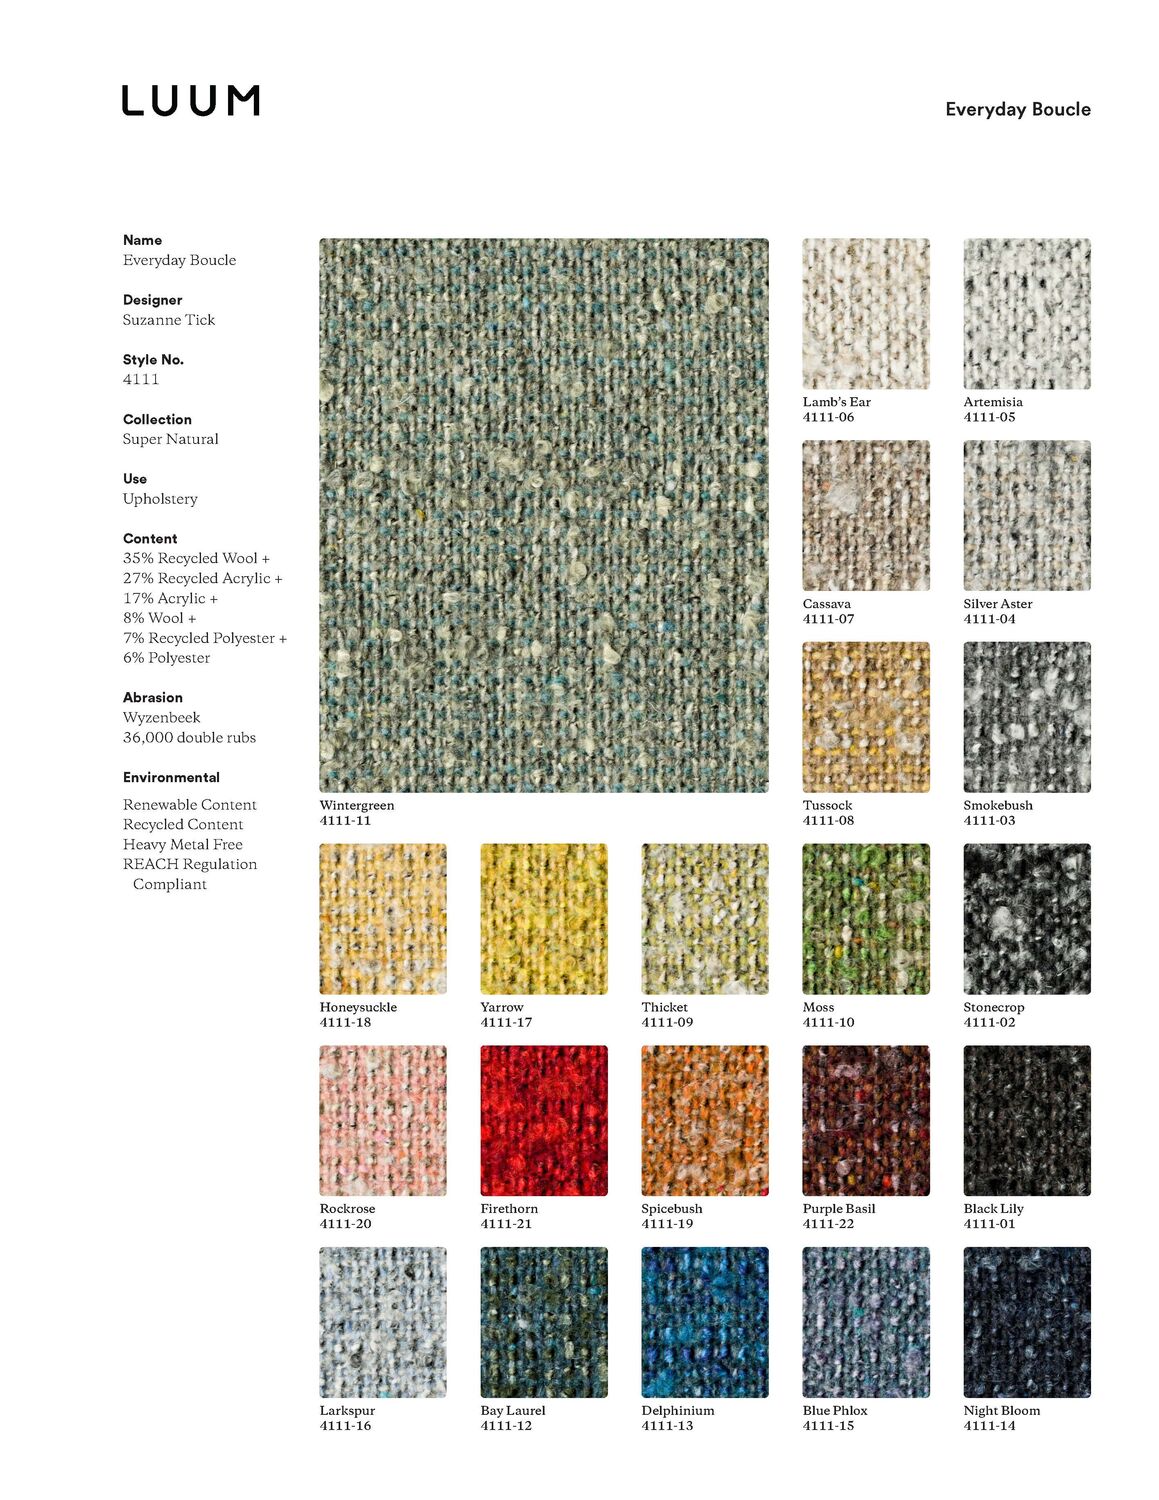 Everyday Boucle - Thicket - 4111 - 09 Sample Card